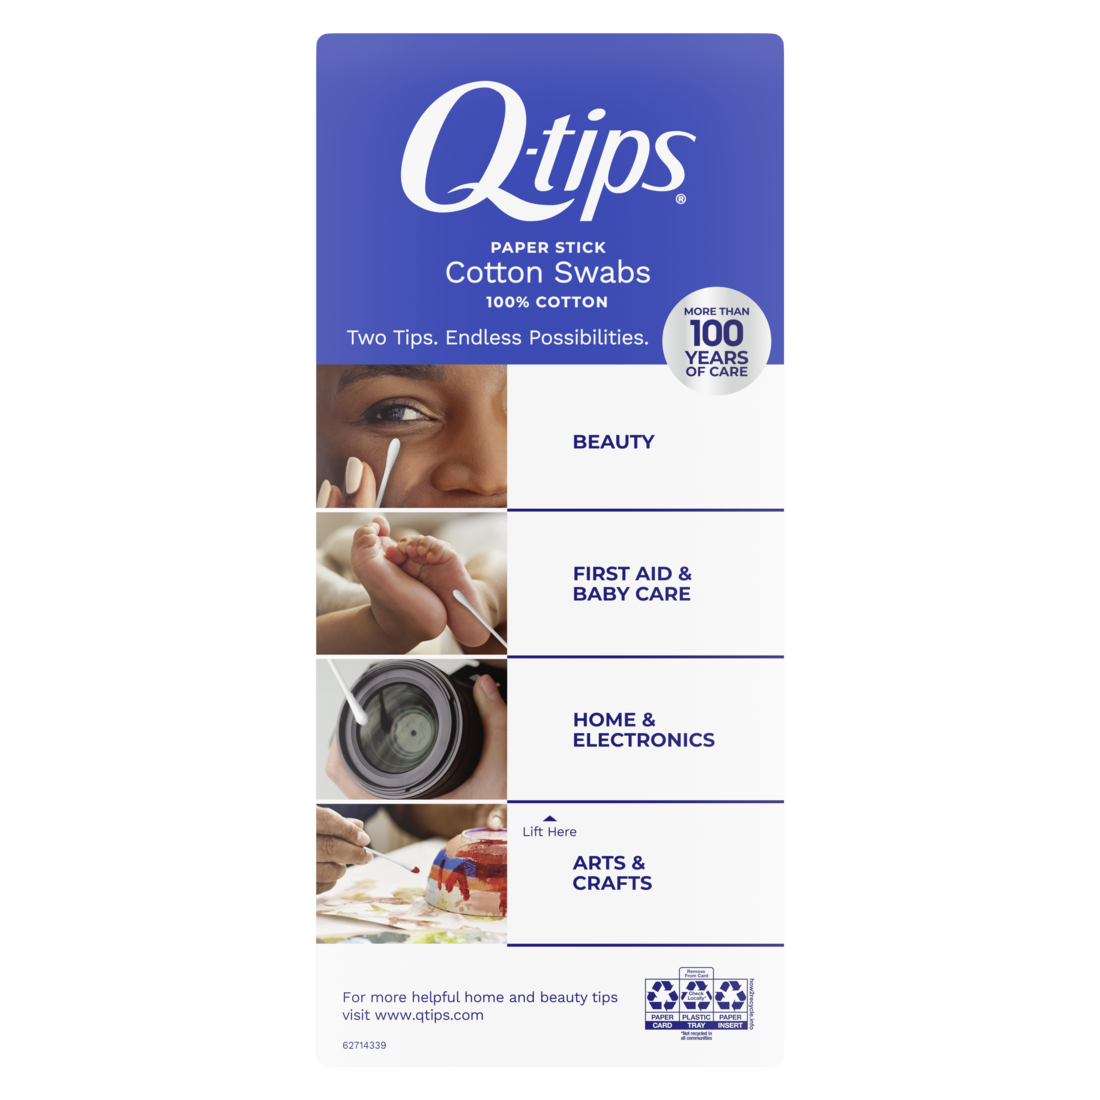 Q-tips Cotton Swabs Original for Hygiene and Beauty Care, Made with 100% Cotton 500 Count - image 2 of 8